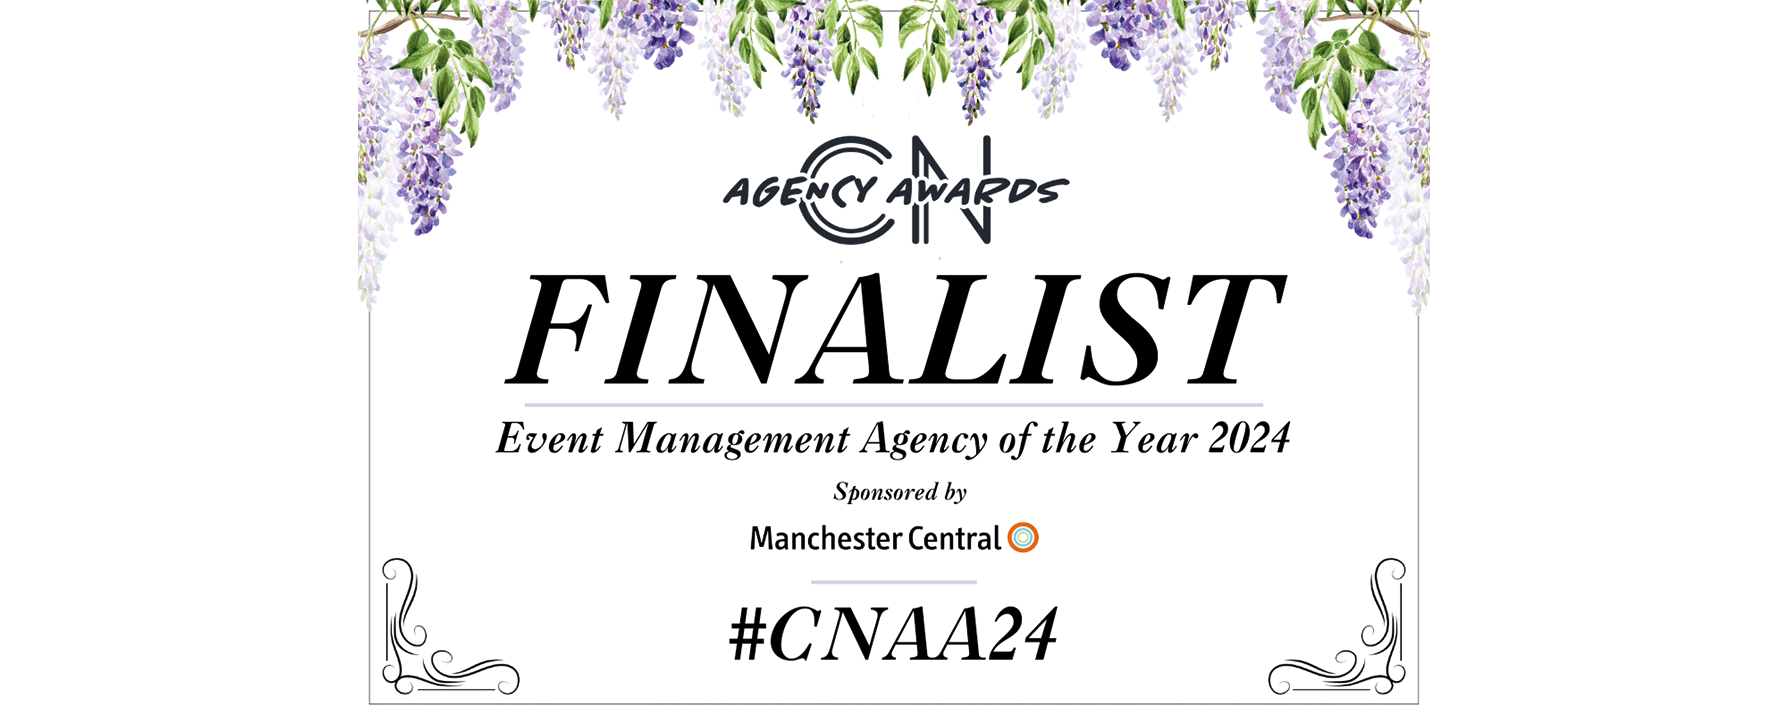 Conference News Awards 2024 Event Management Agency of the Year Finalists ZiaBia